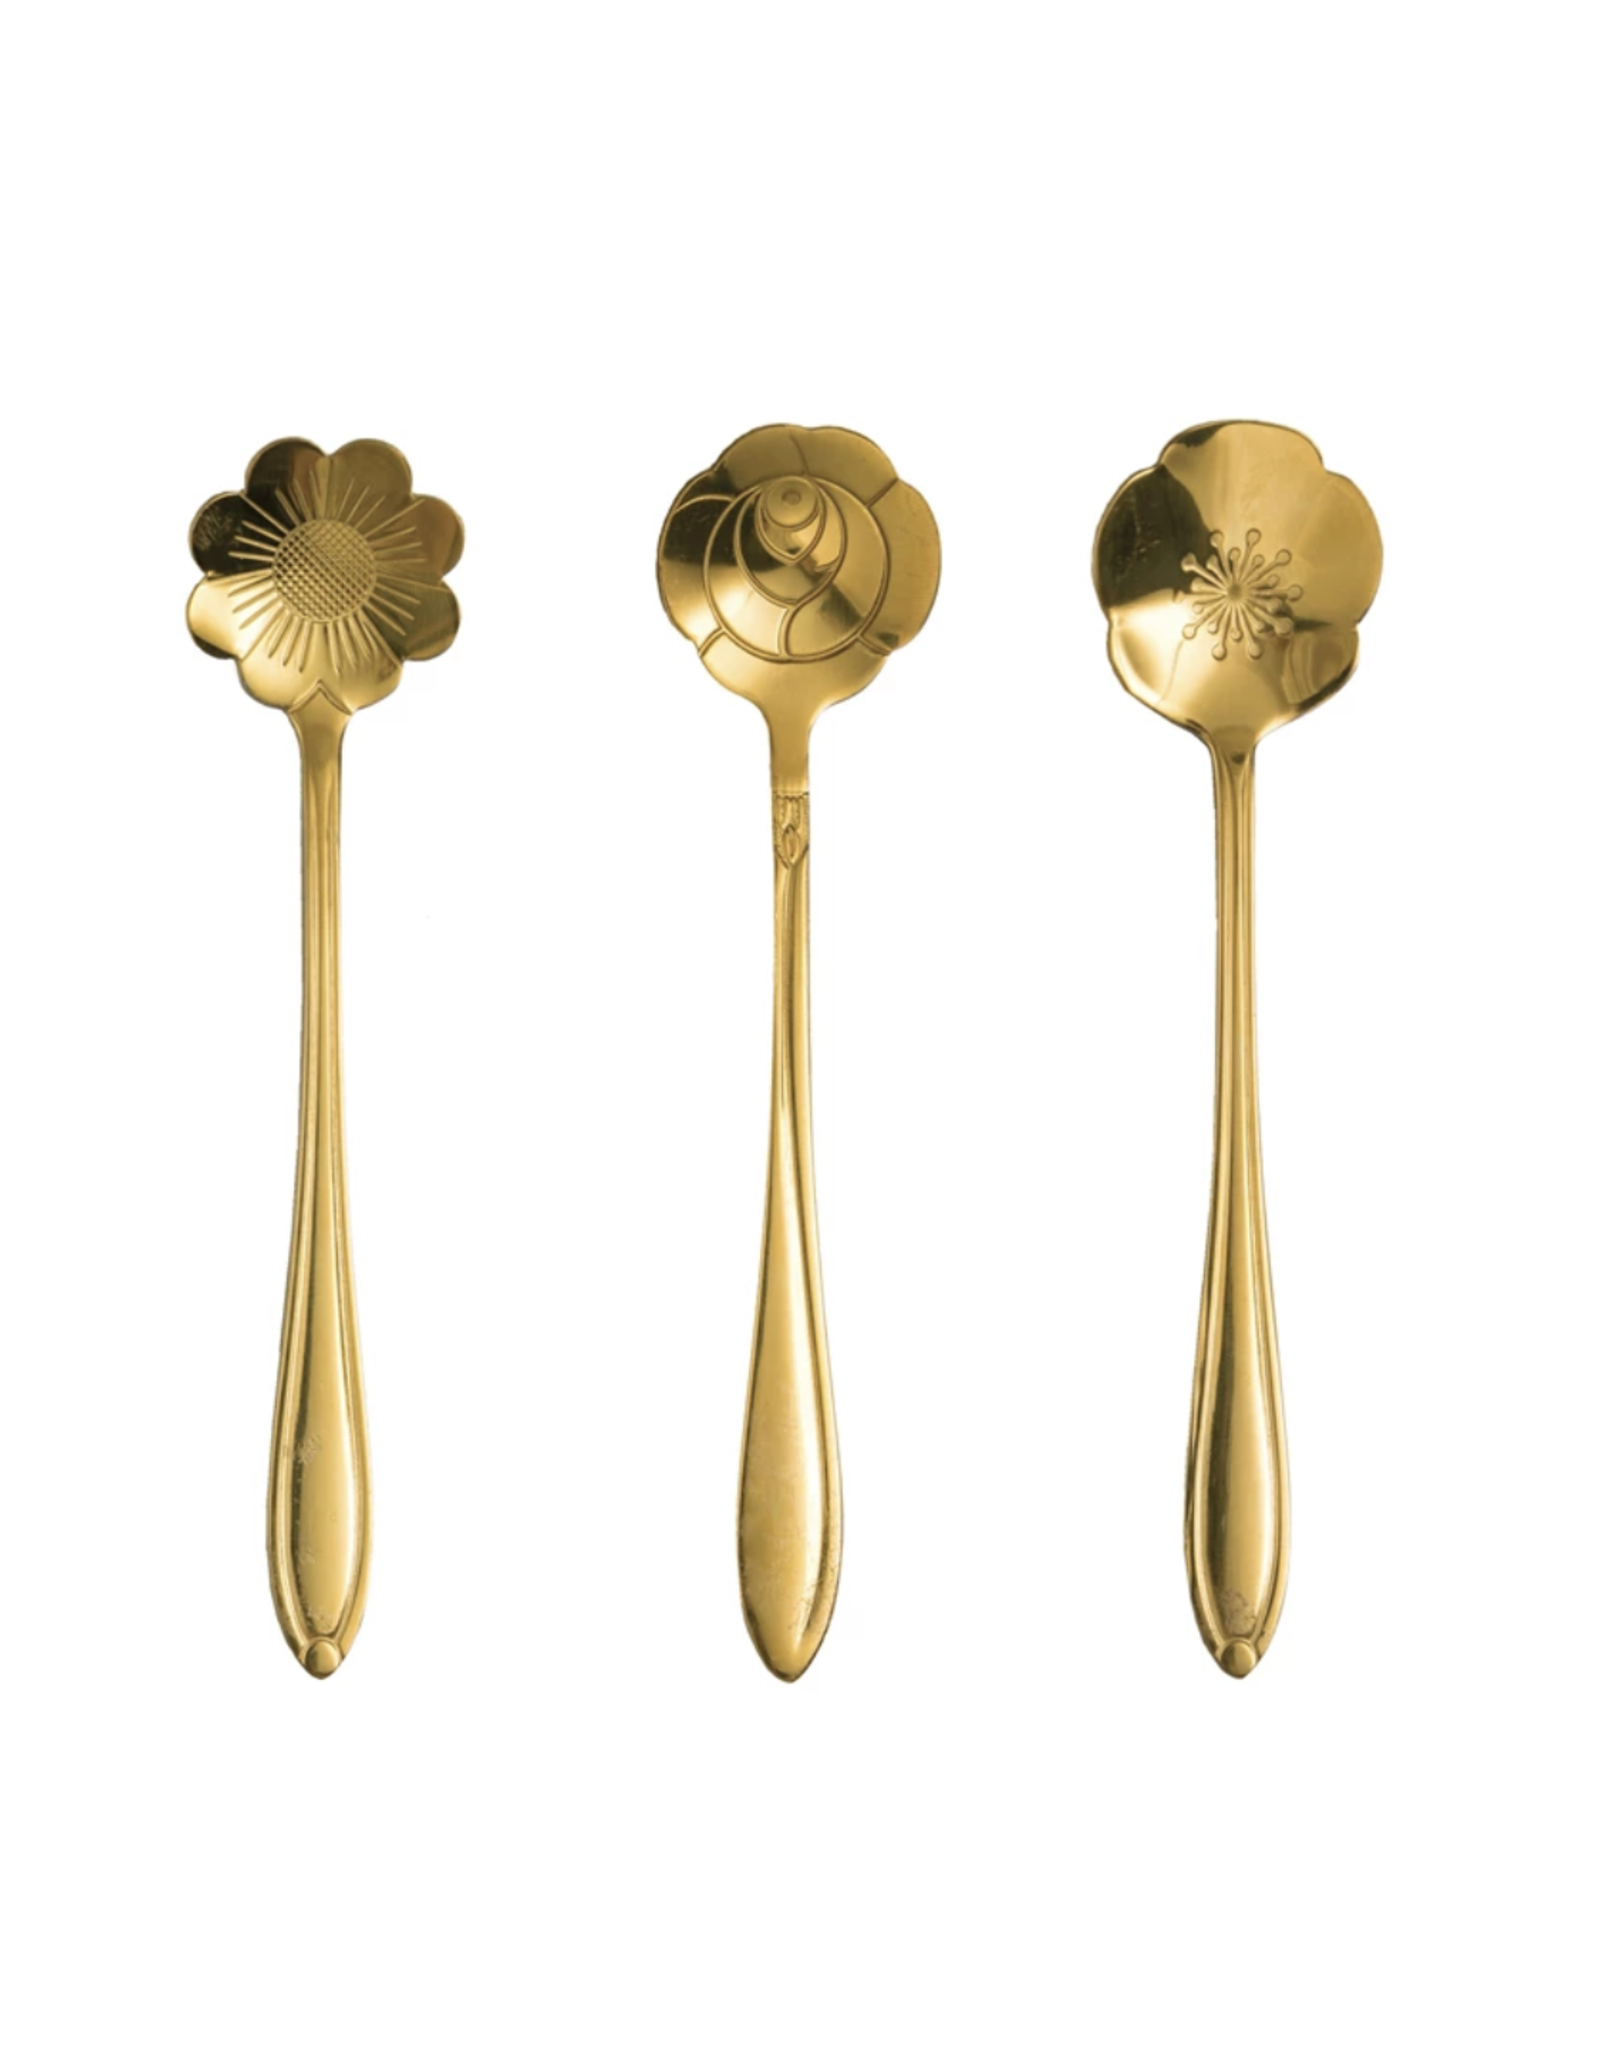 Gold Flower Spoons Set of 3